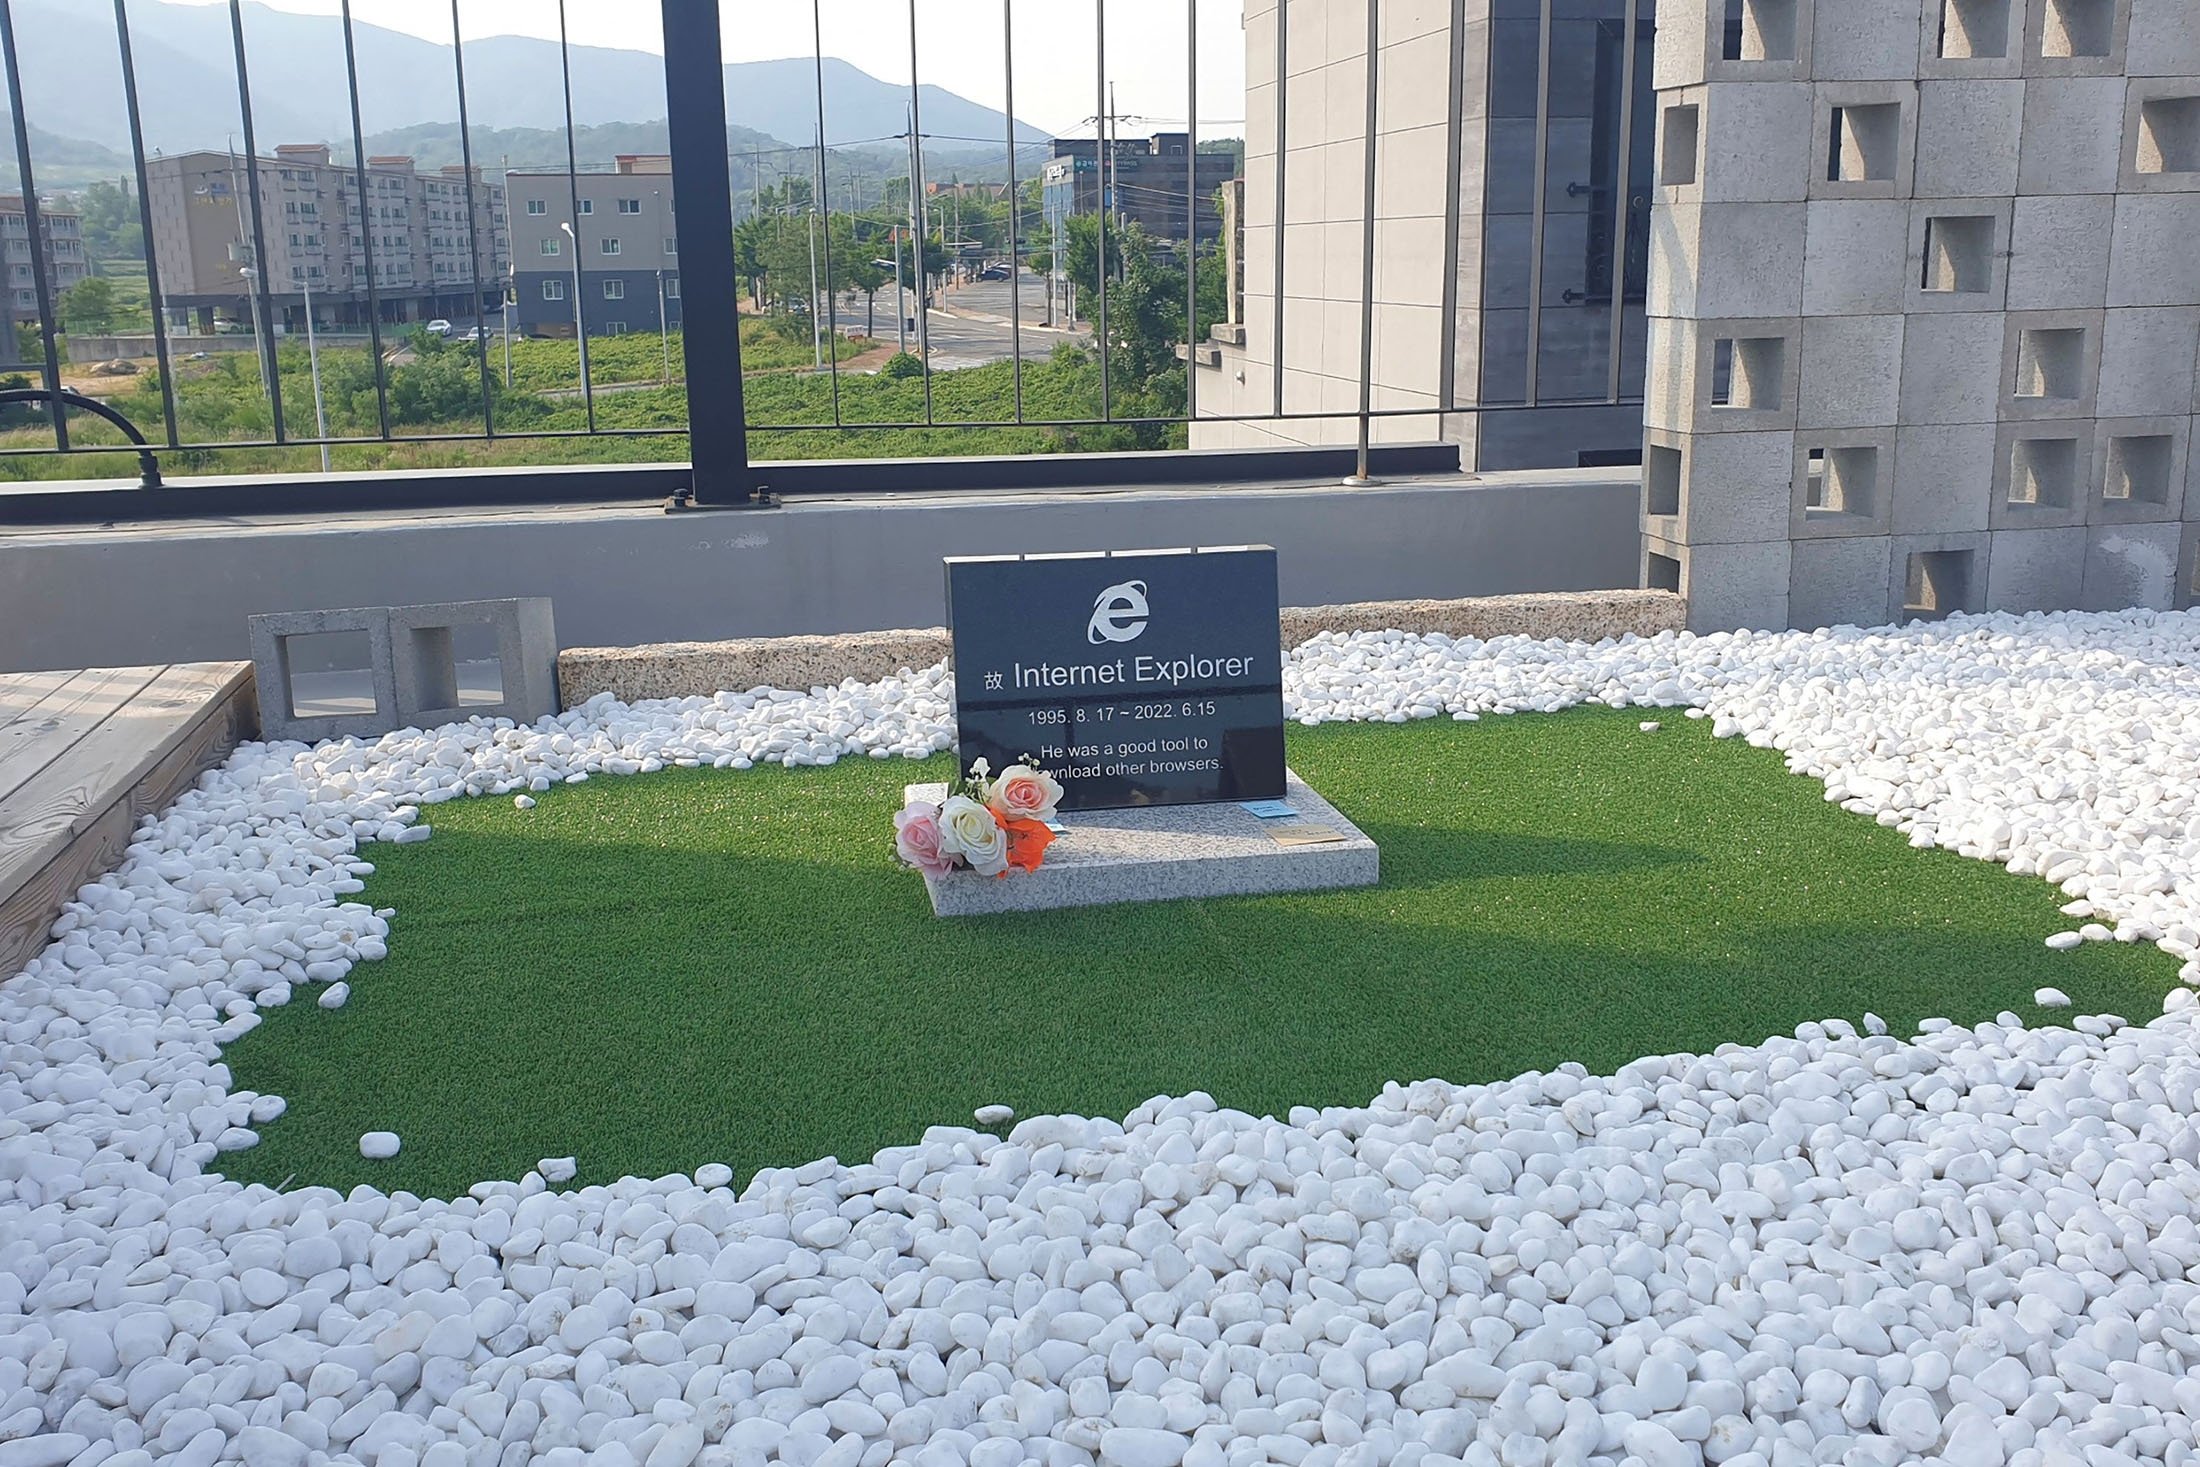 Internet Explorer browser tombstone, set up by South Korean software engineer Jung Ki-young, on a cafe roof in South Korea's Gyeongju, June 17, 2022. (Jung Ki-Young via Reuters)